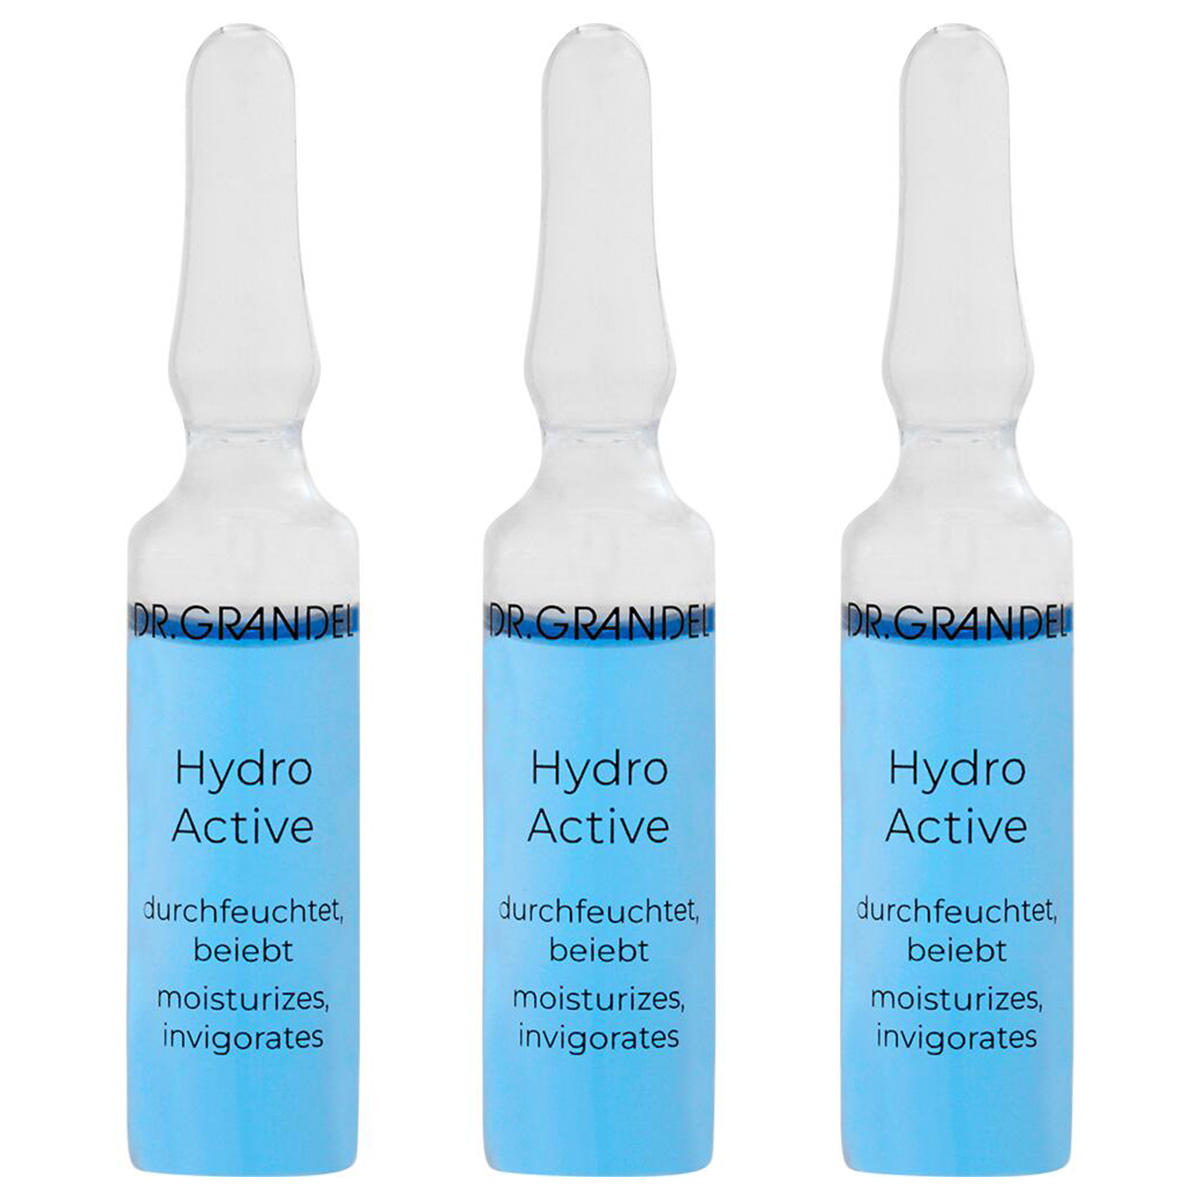 DR. GRANDEL Professional Collection Hydro Active 3 x 3 ml - 3